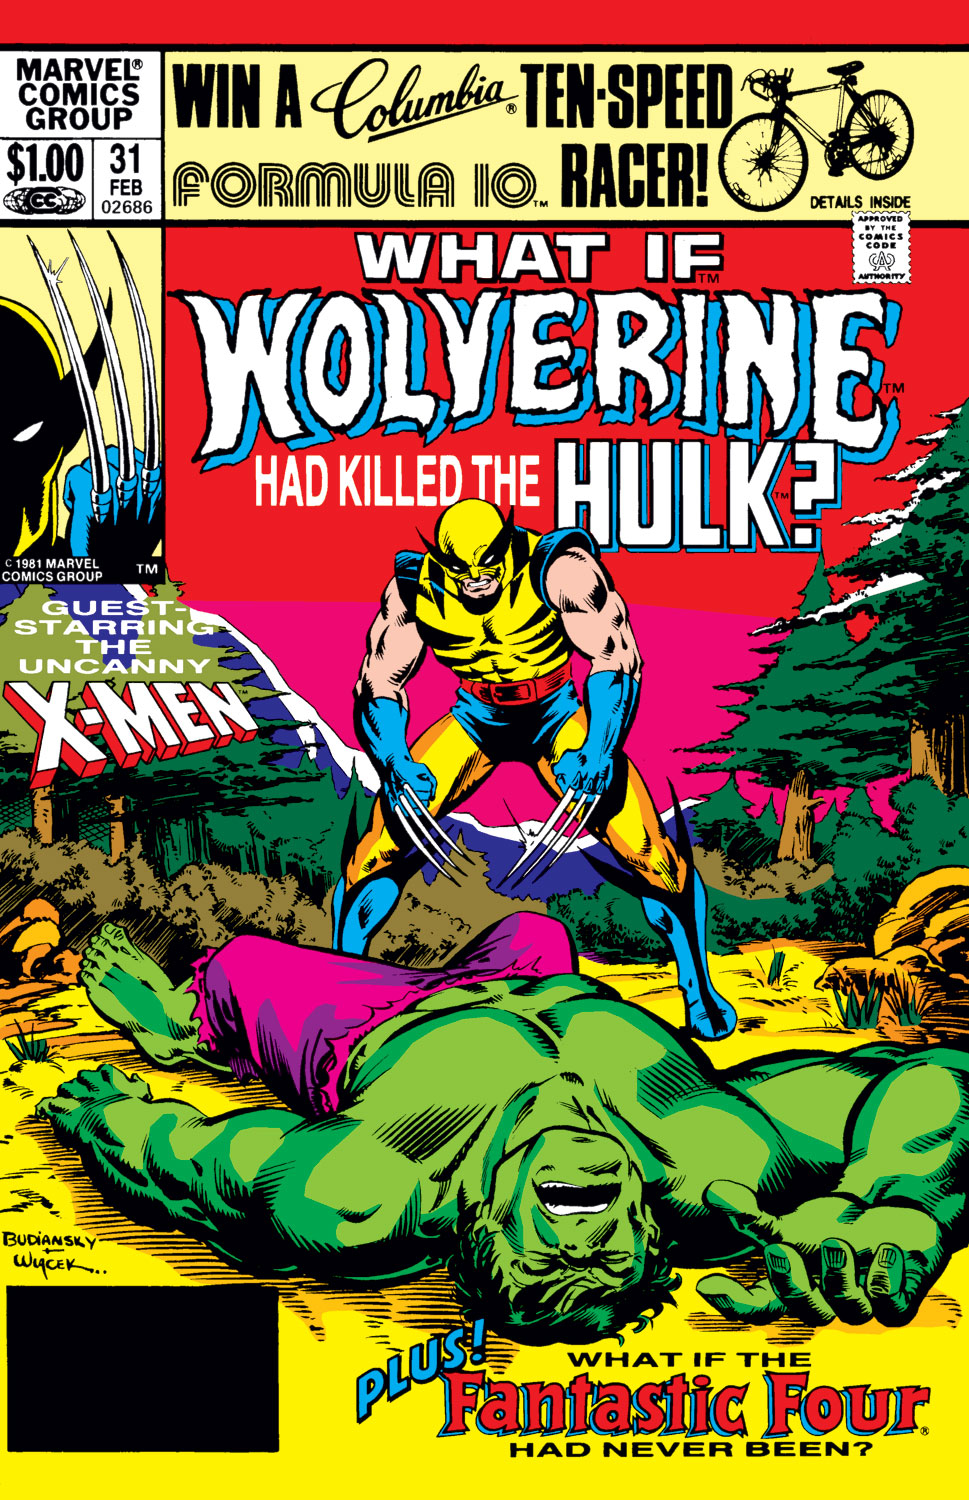 What If? (1977) issue 31 - Wolverine had killed the Hulk - Page 1